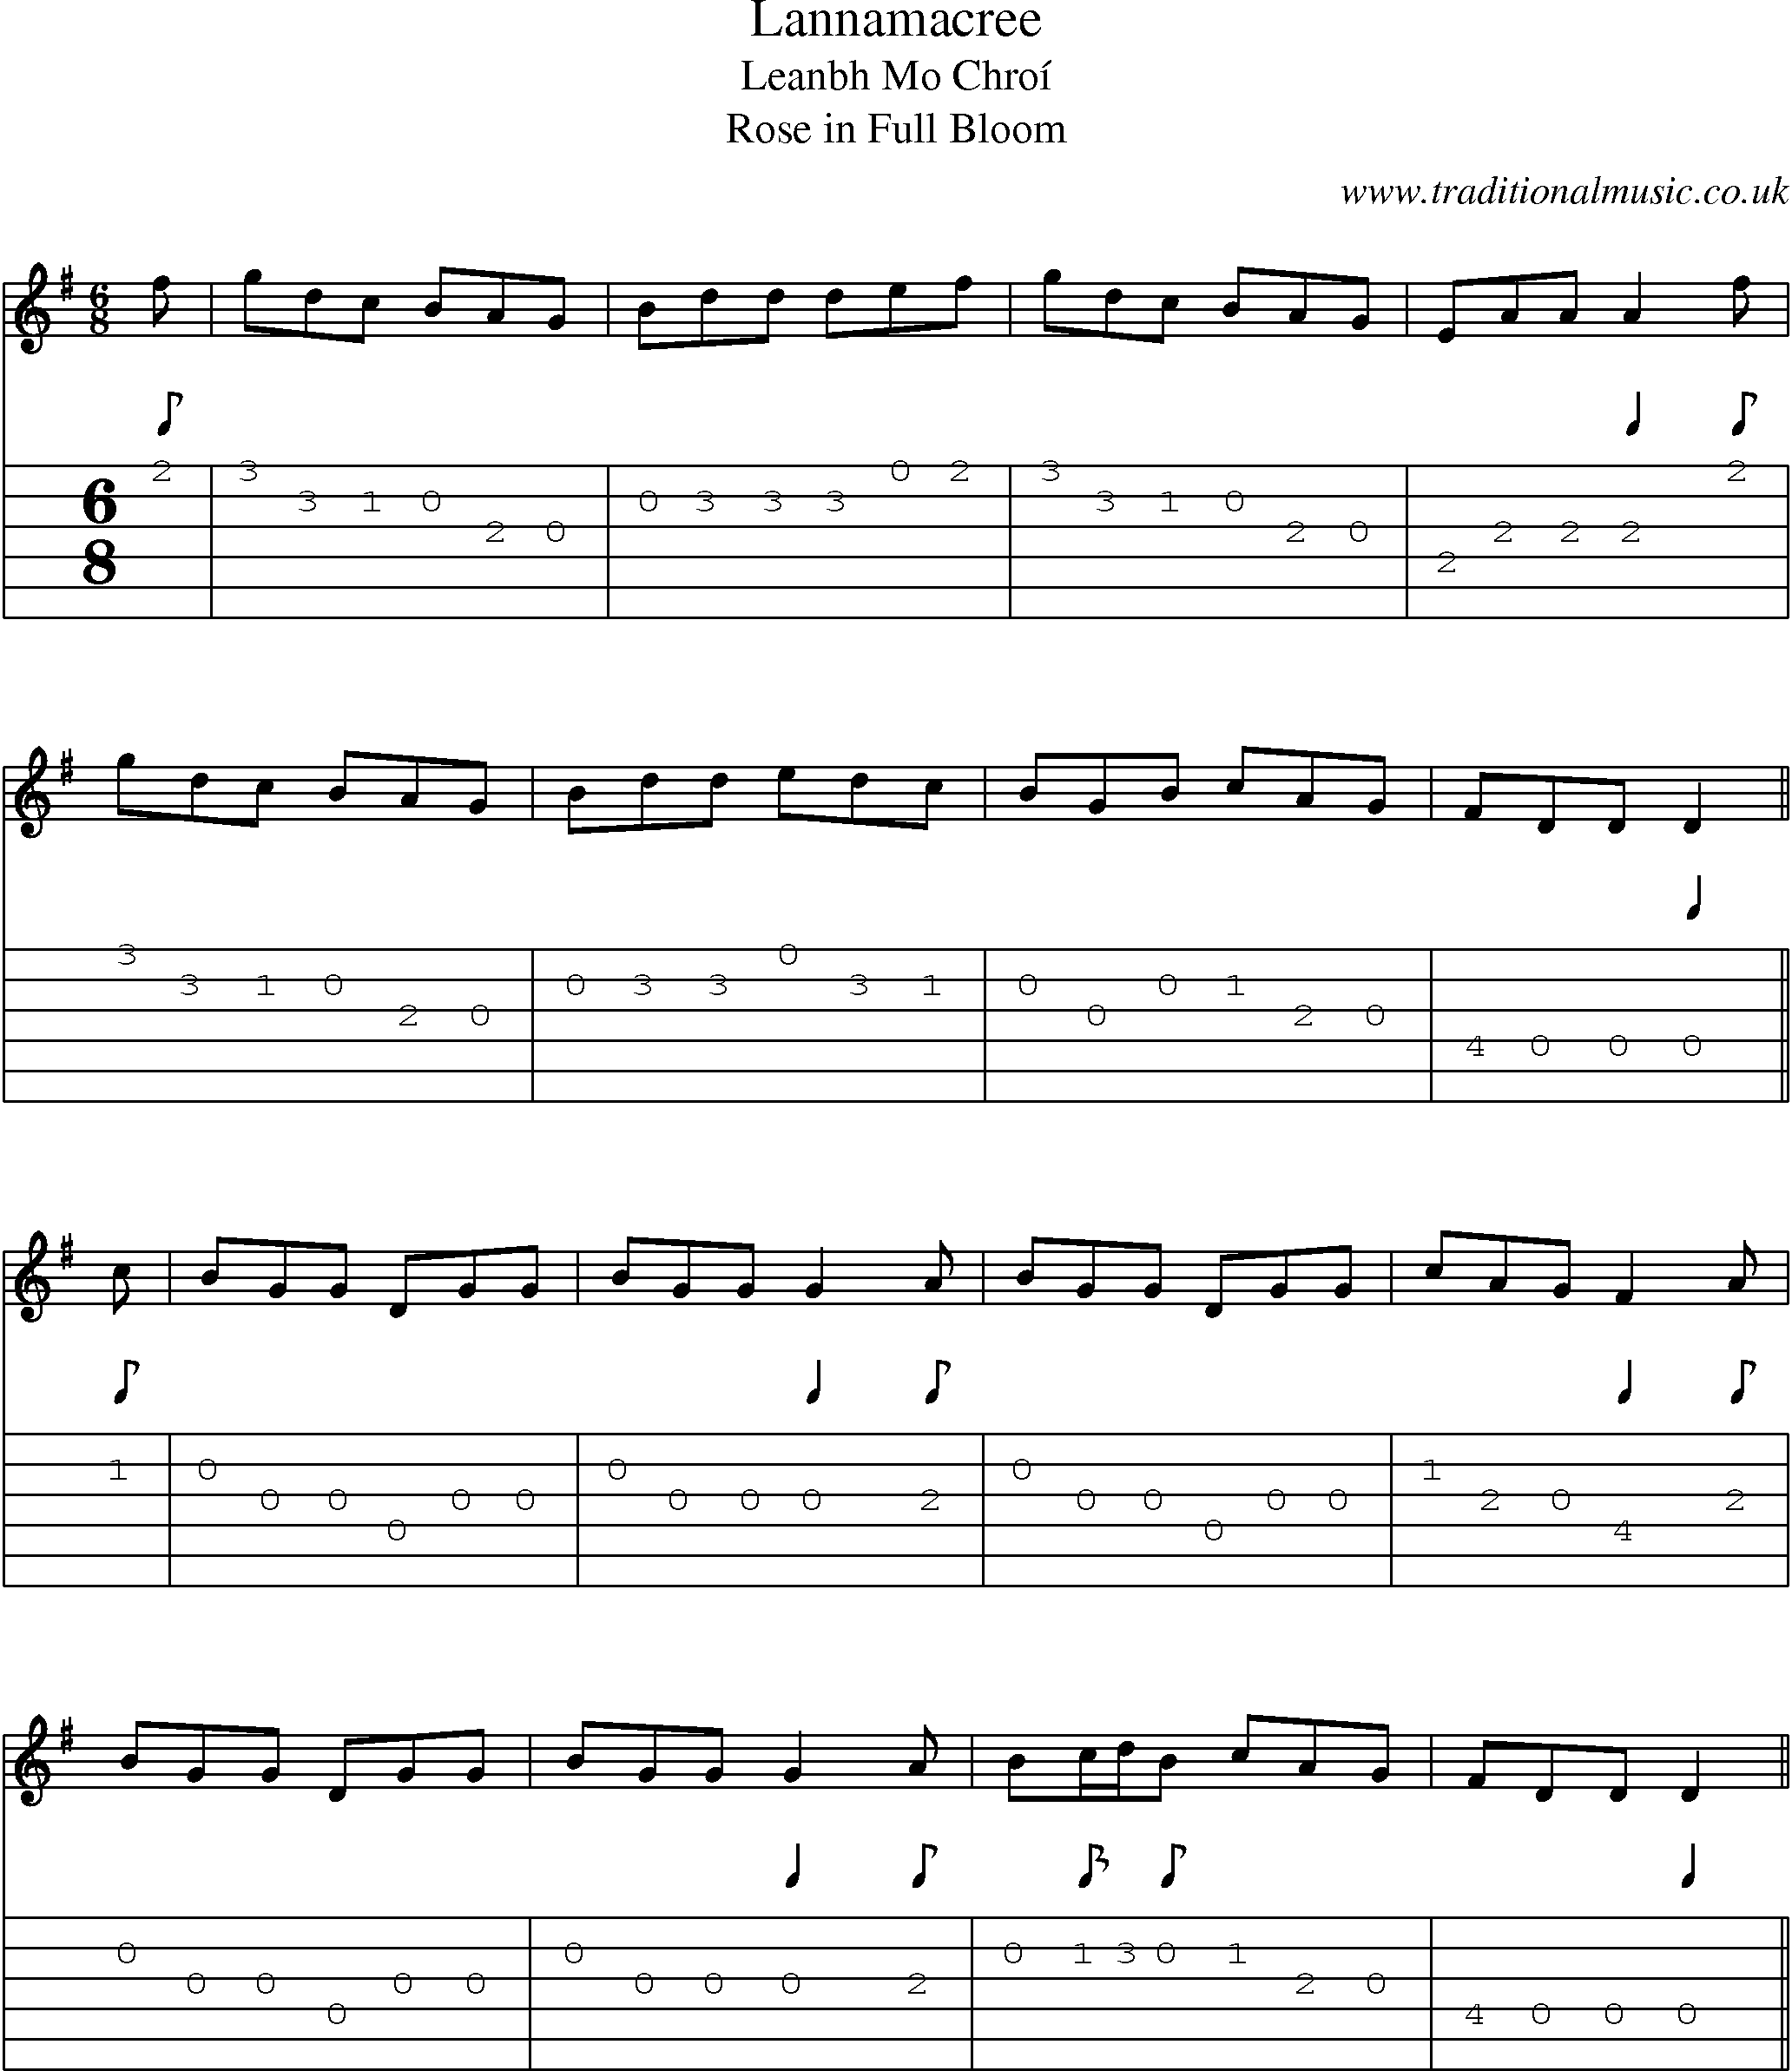 Music Score and Guitar Tabs for Lannamacree